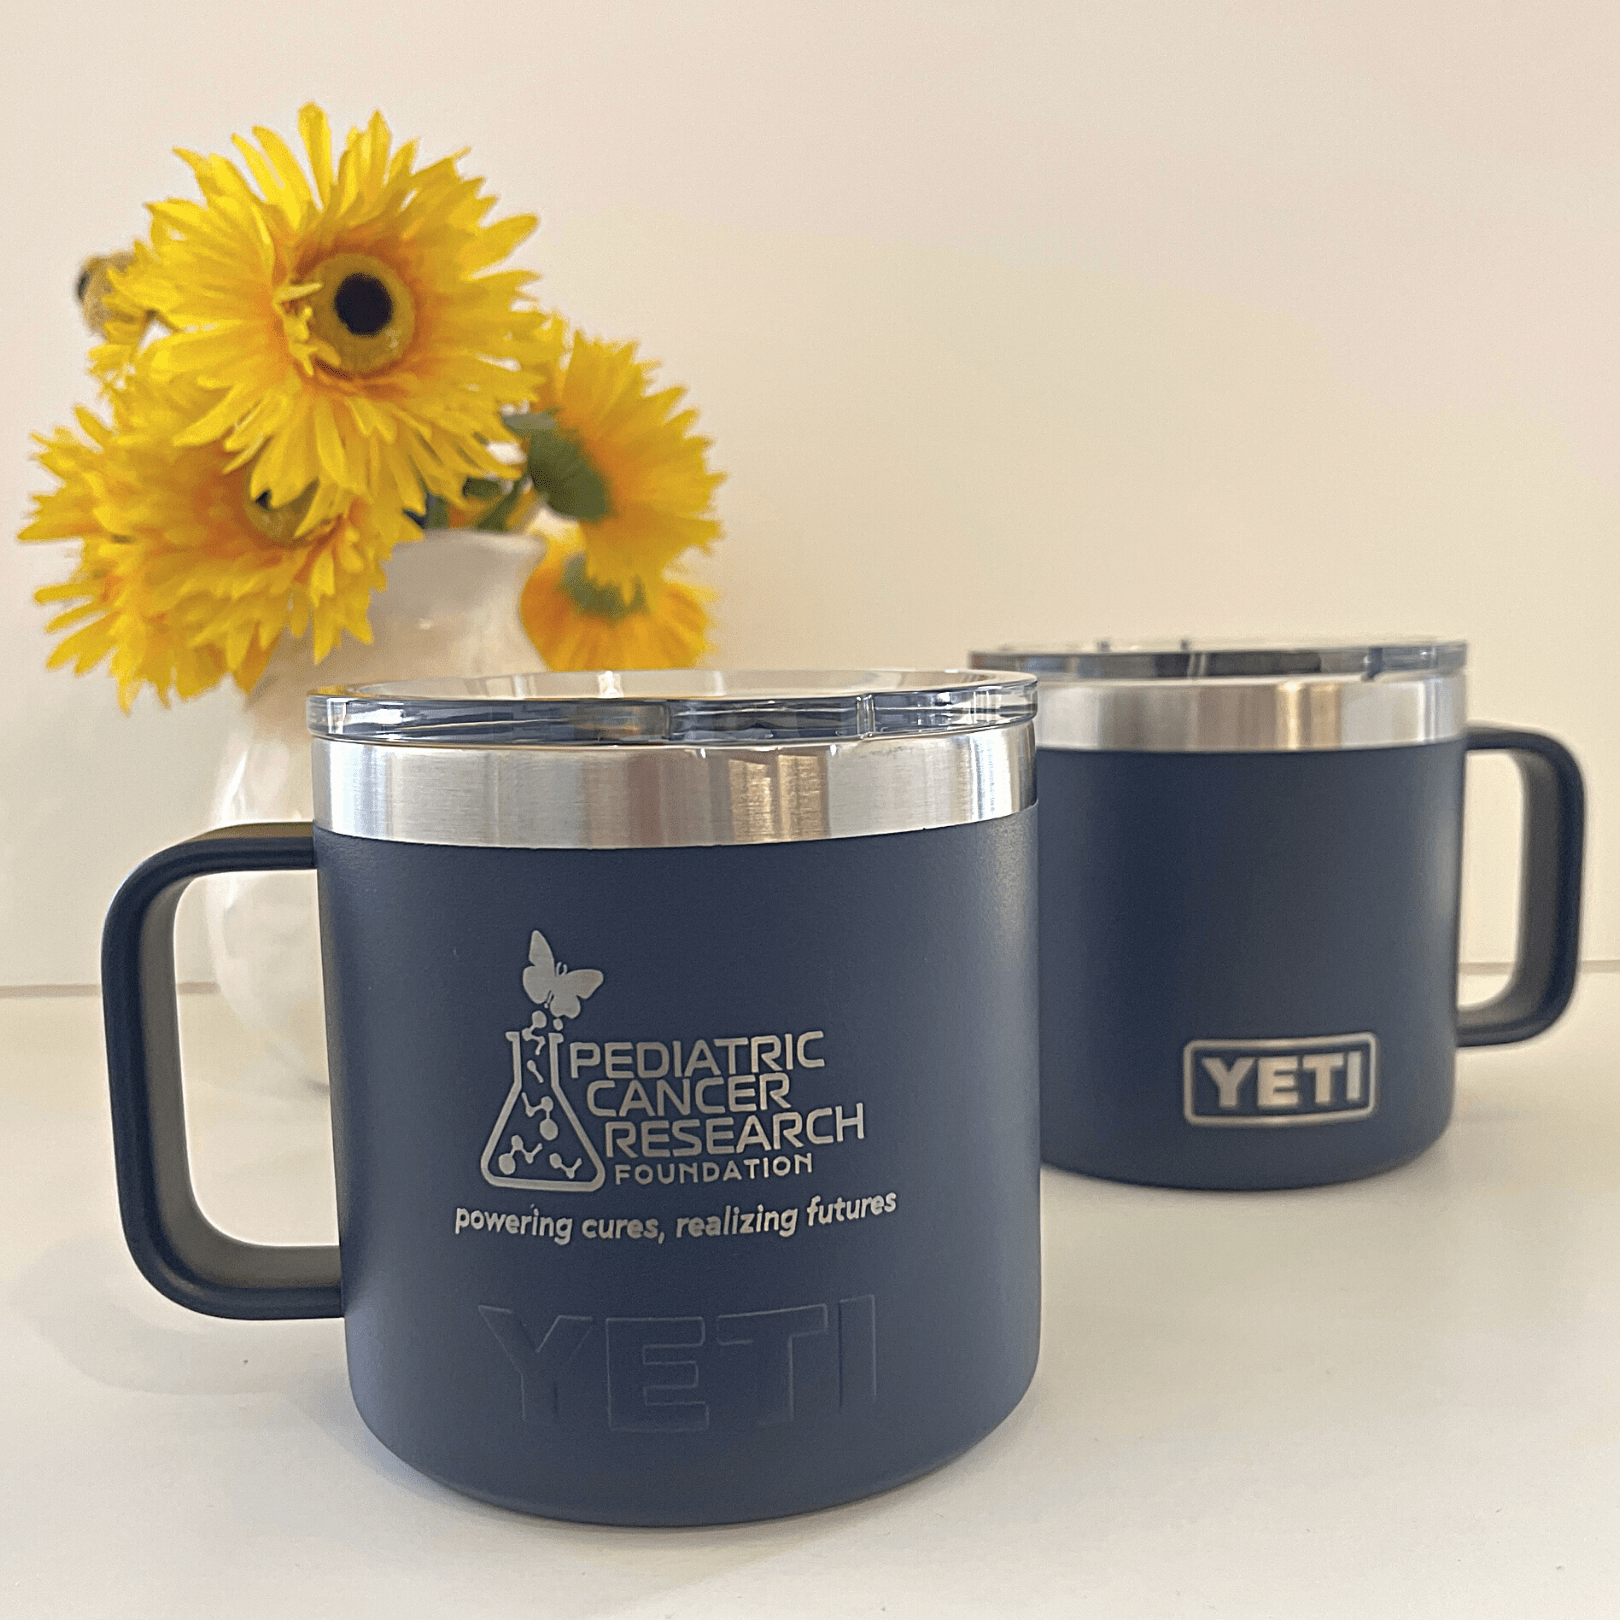 Have you seen the NEW Yeti 14oz mug? Same great quality you expect from Yeti  with the convenience and capacity to enjoy coffee and…